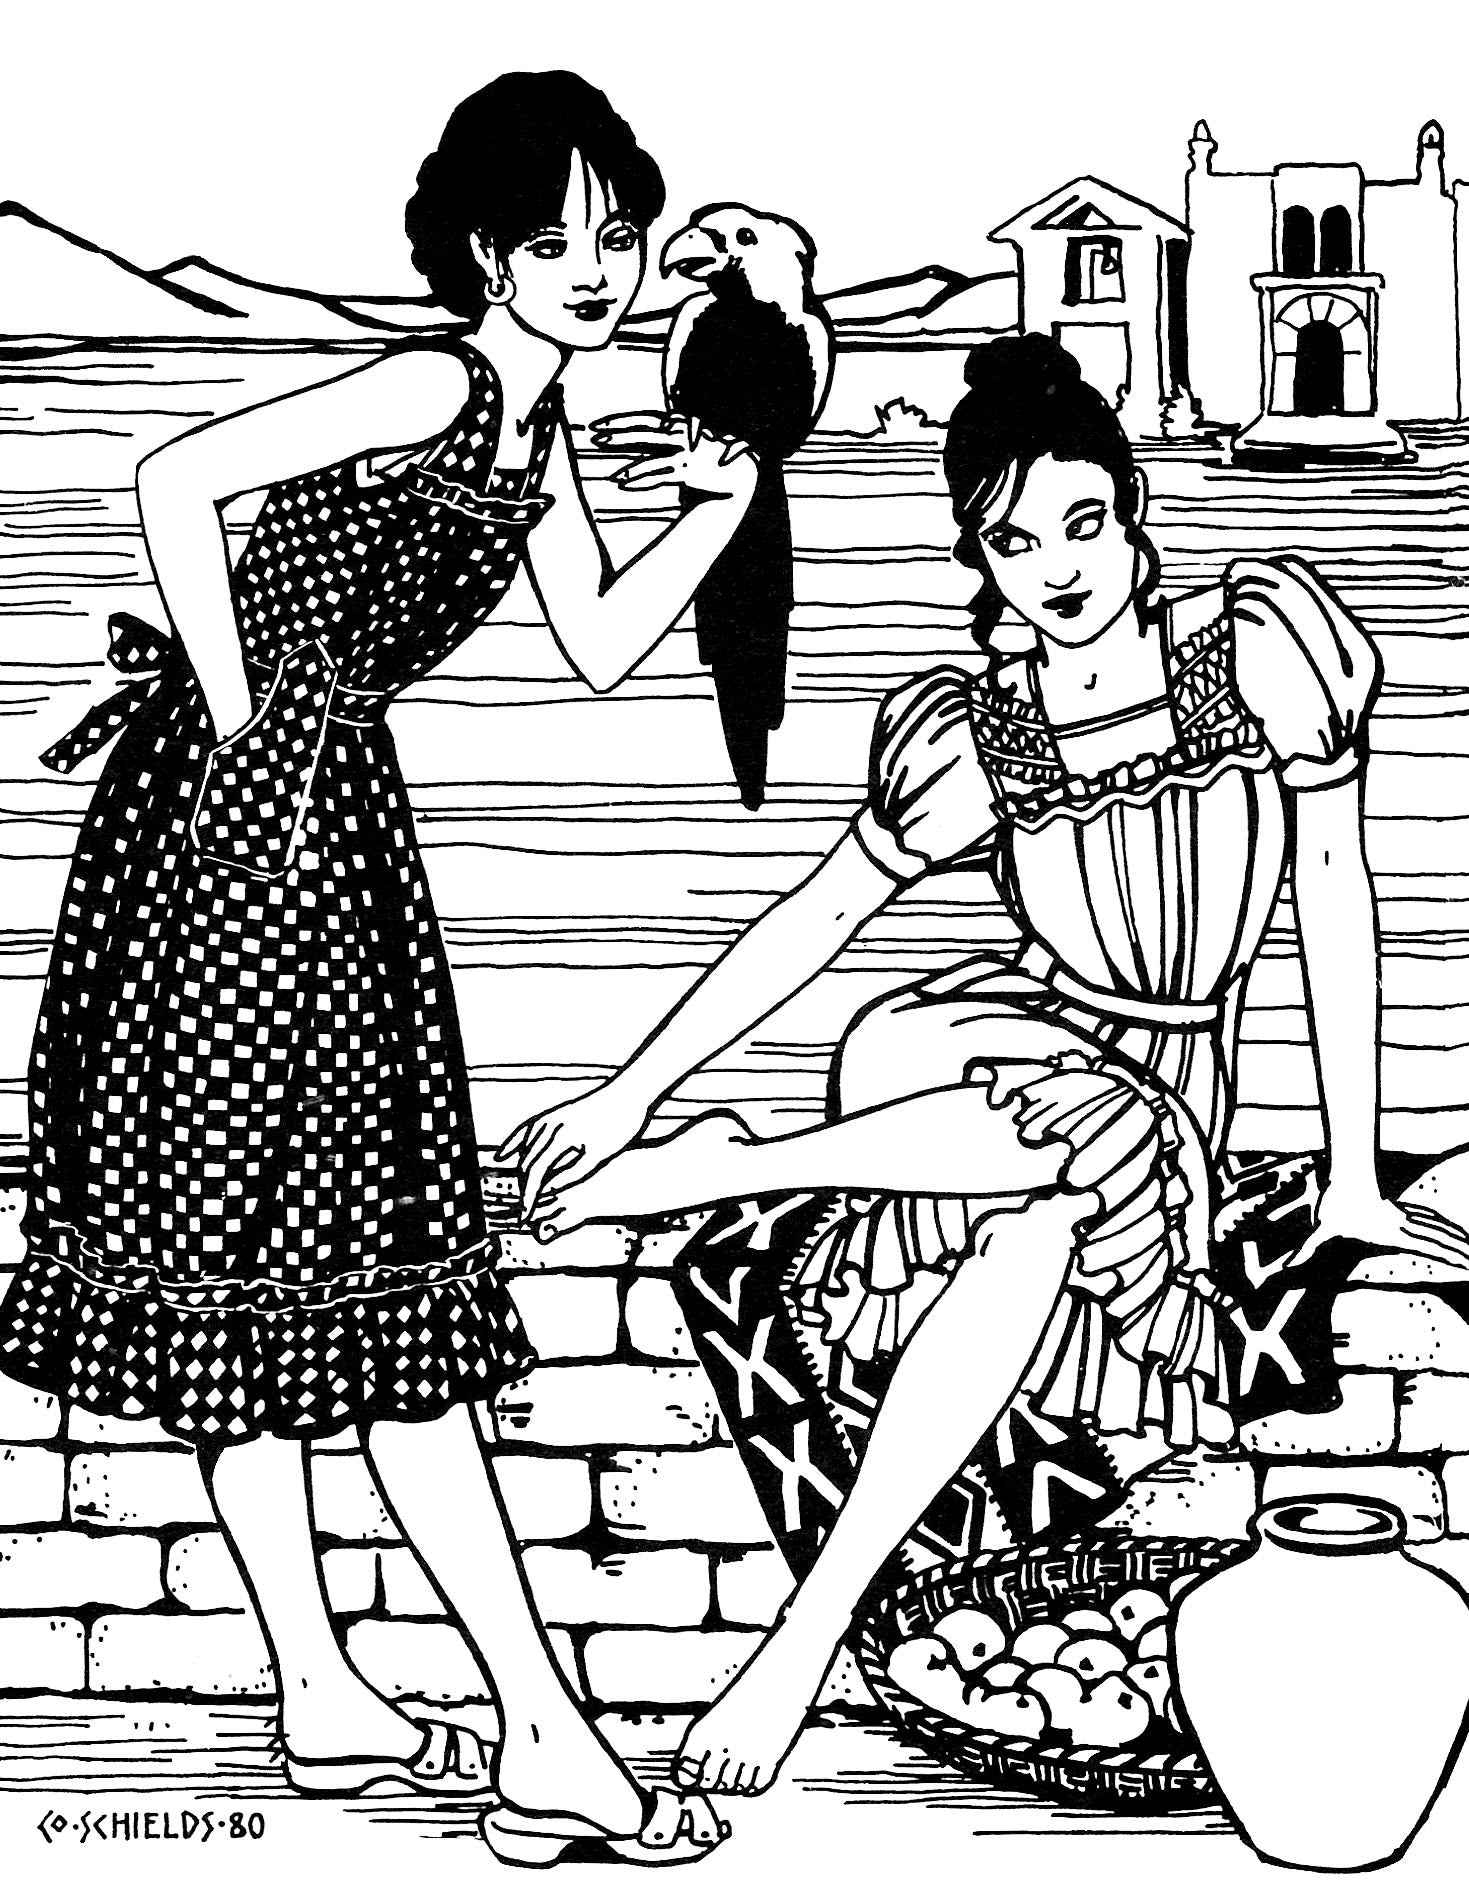 Pen and ink illustration of Guatemalan Gabacha - of two women, one standing in a sleeveless apron and holding a parrot; and one sitting on a wall in a sleeved dress.  illustration by Gretchen Schields.